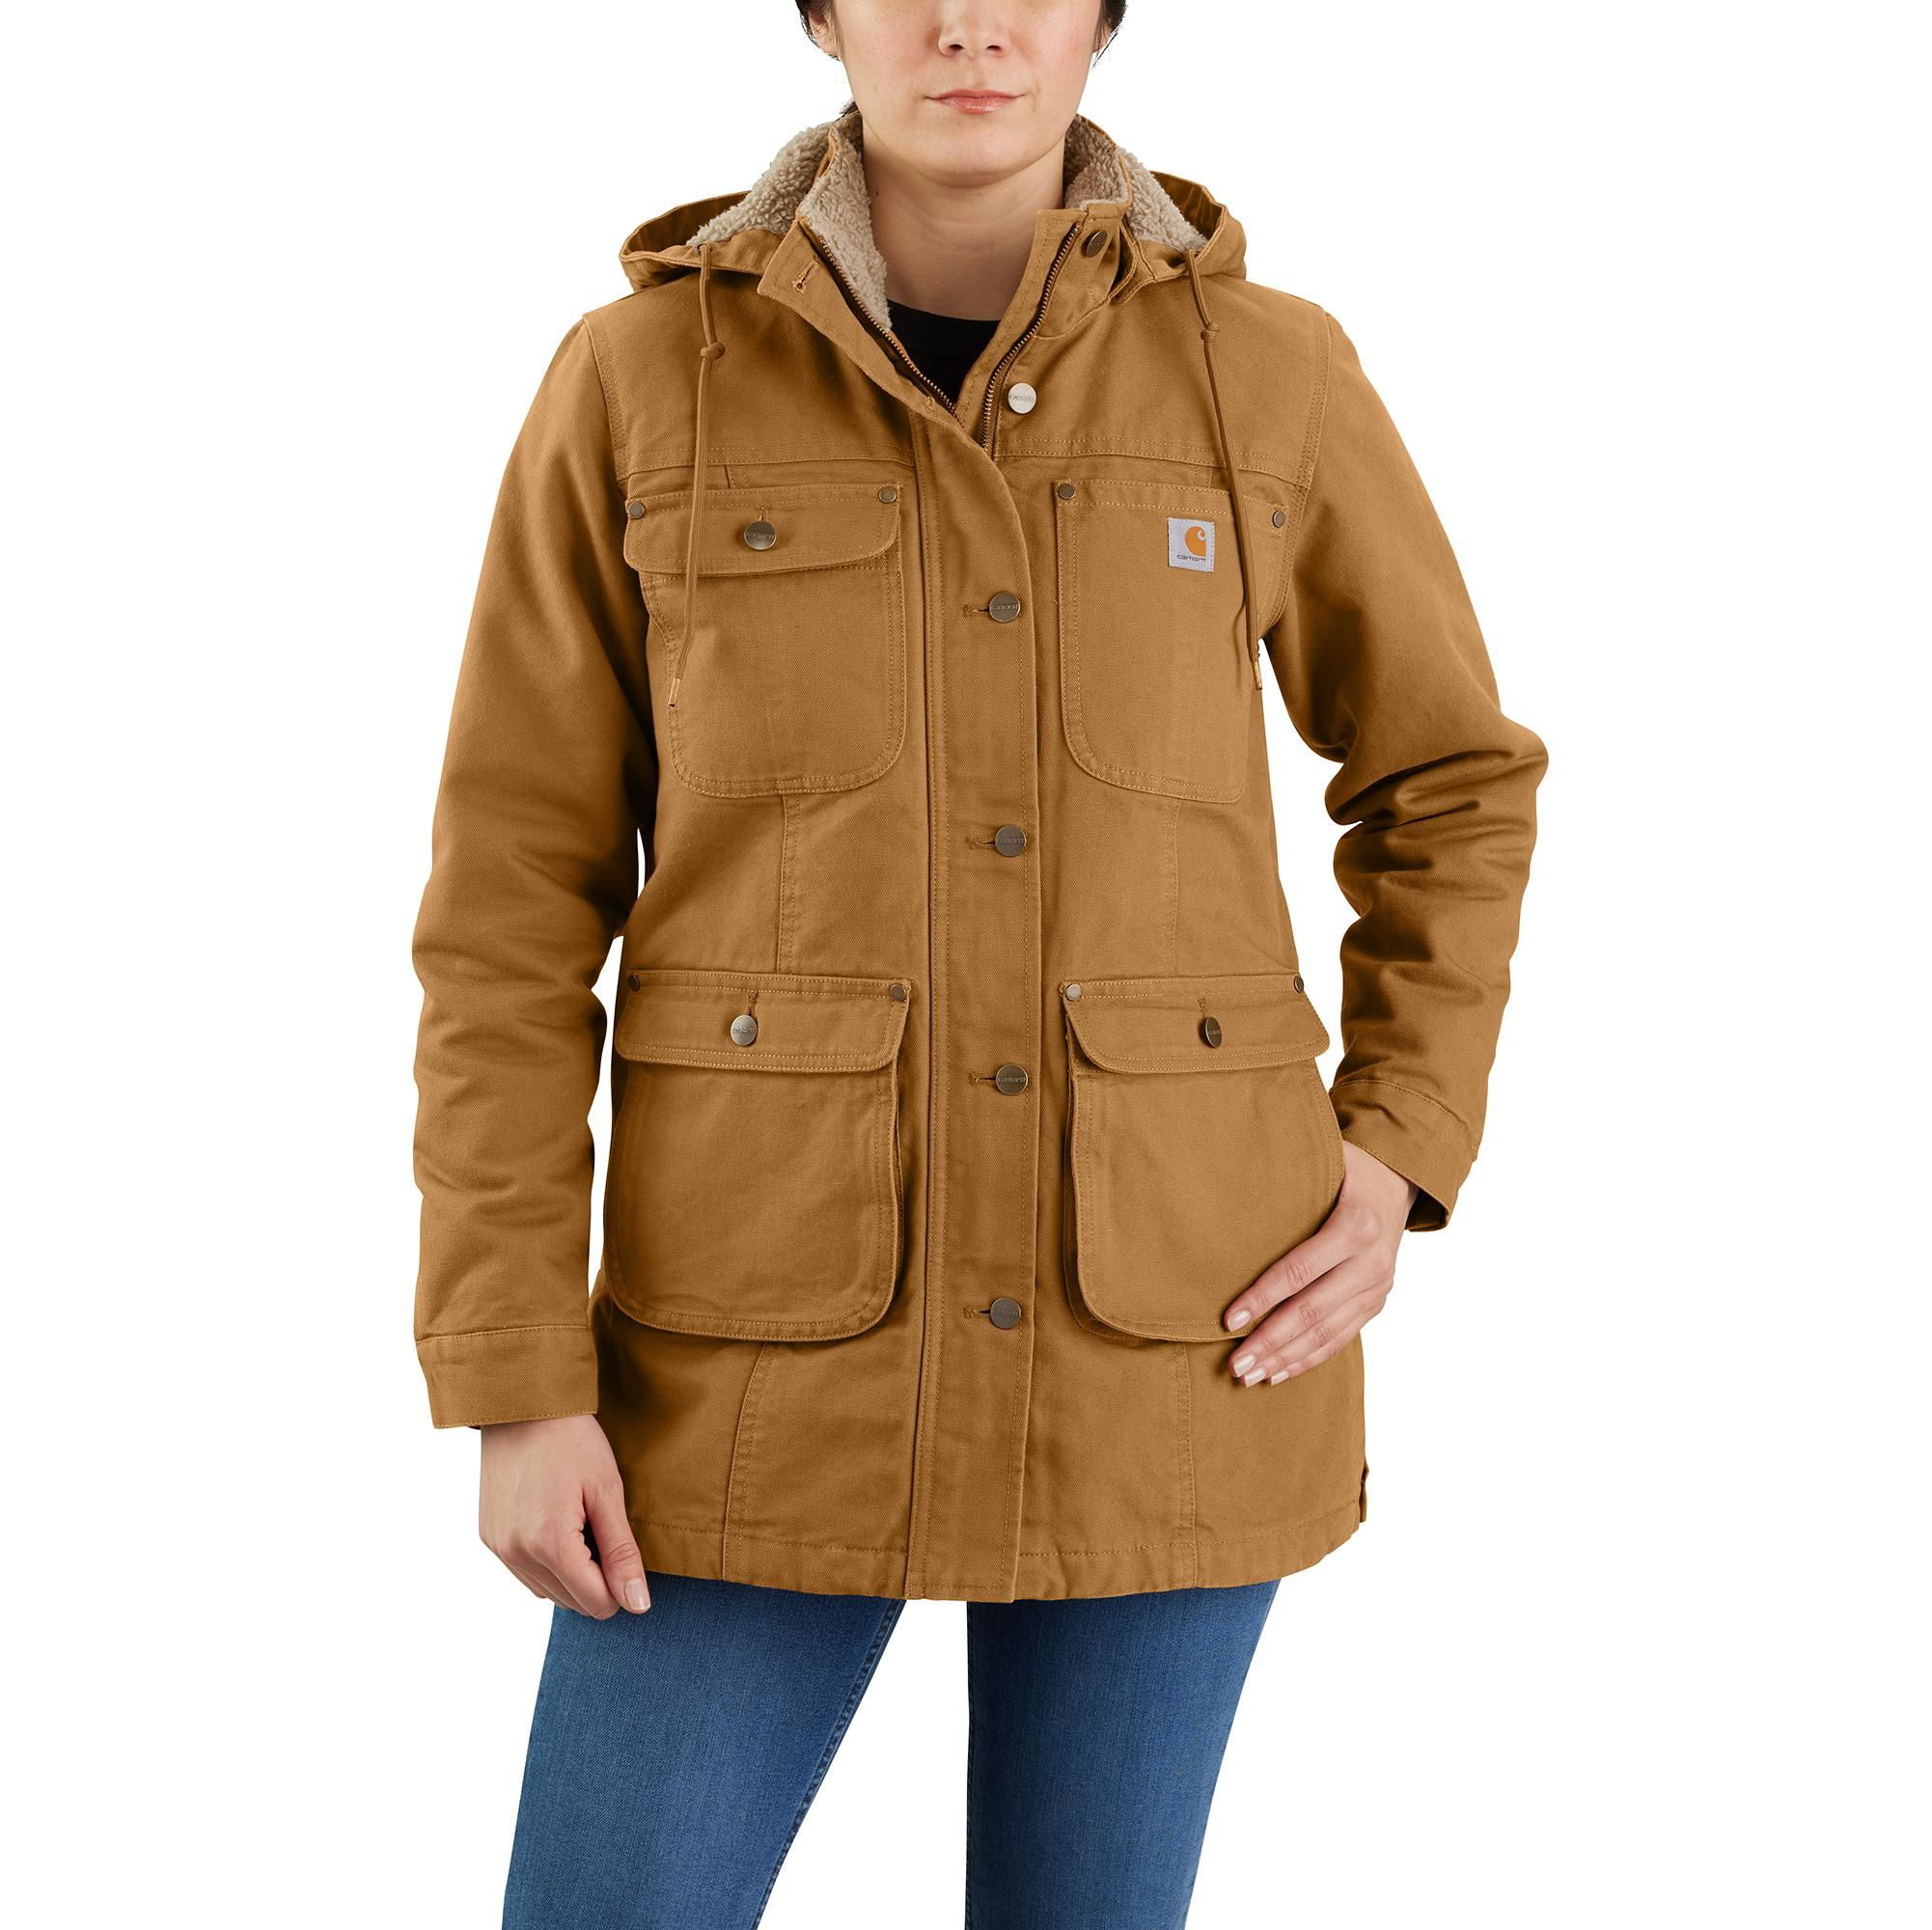 Carhartt Women's Loose Fit Weathered Duck Coat, Black, X-Small